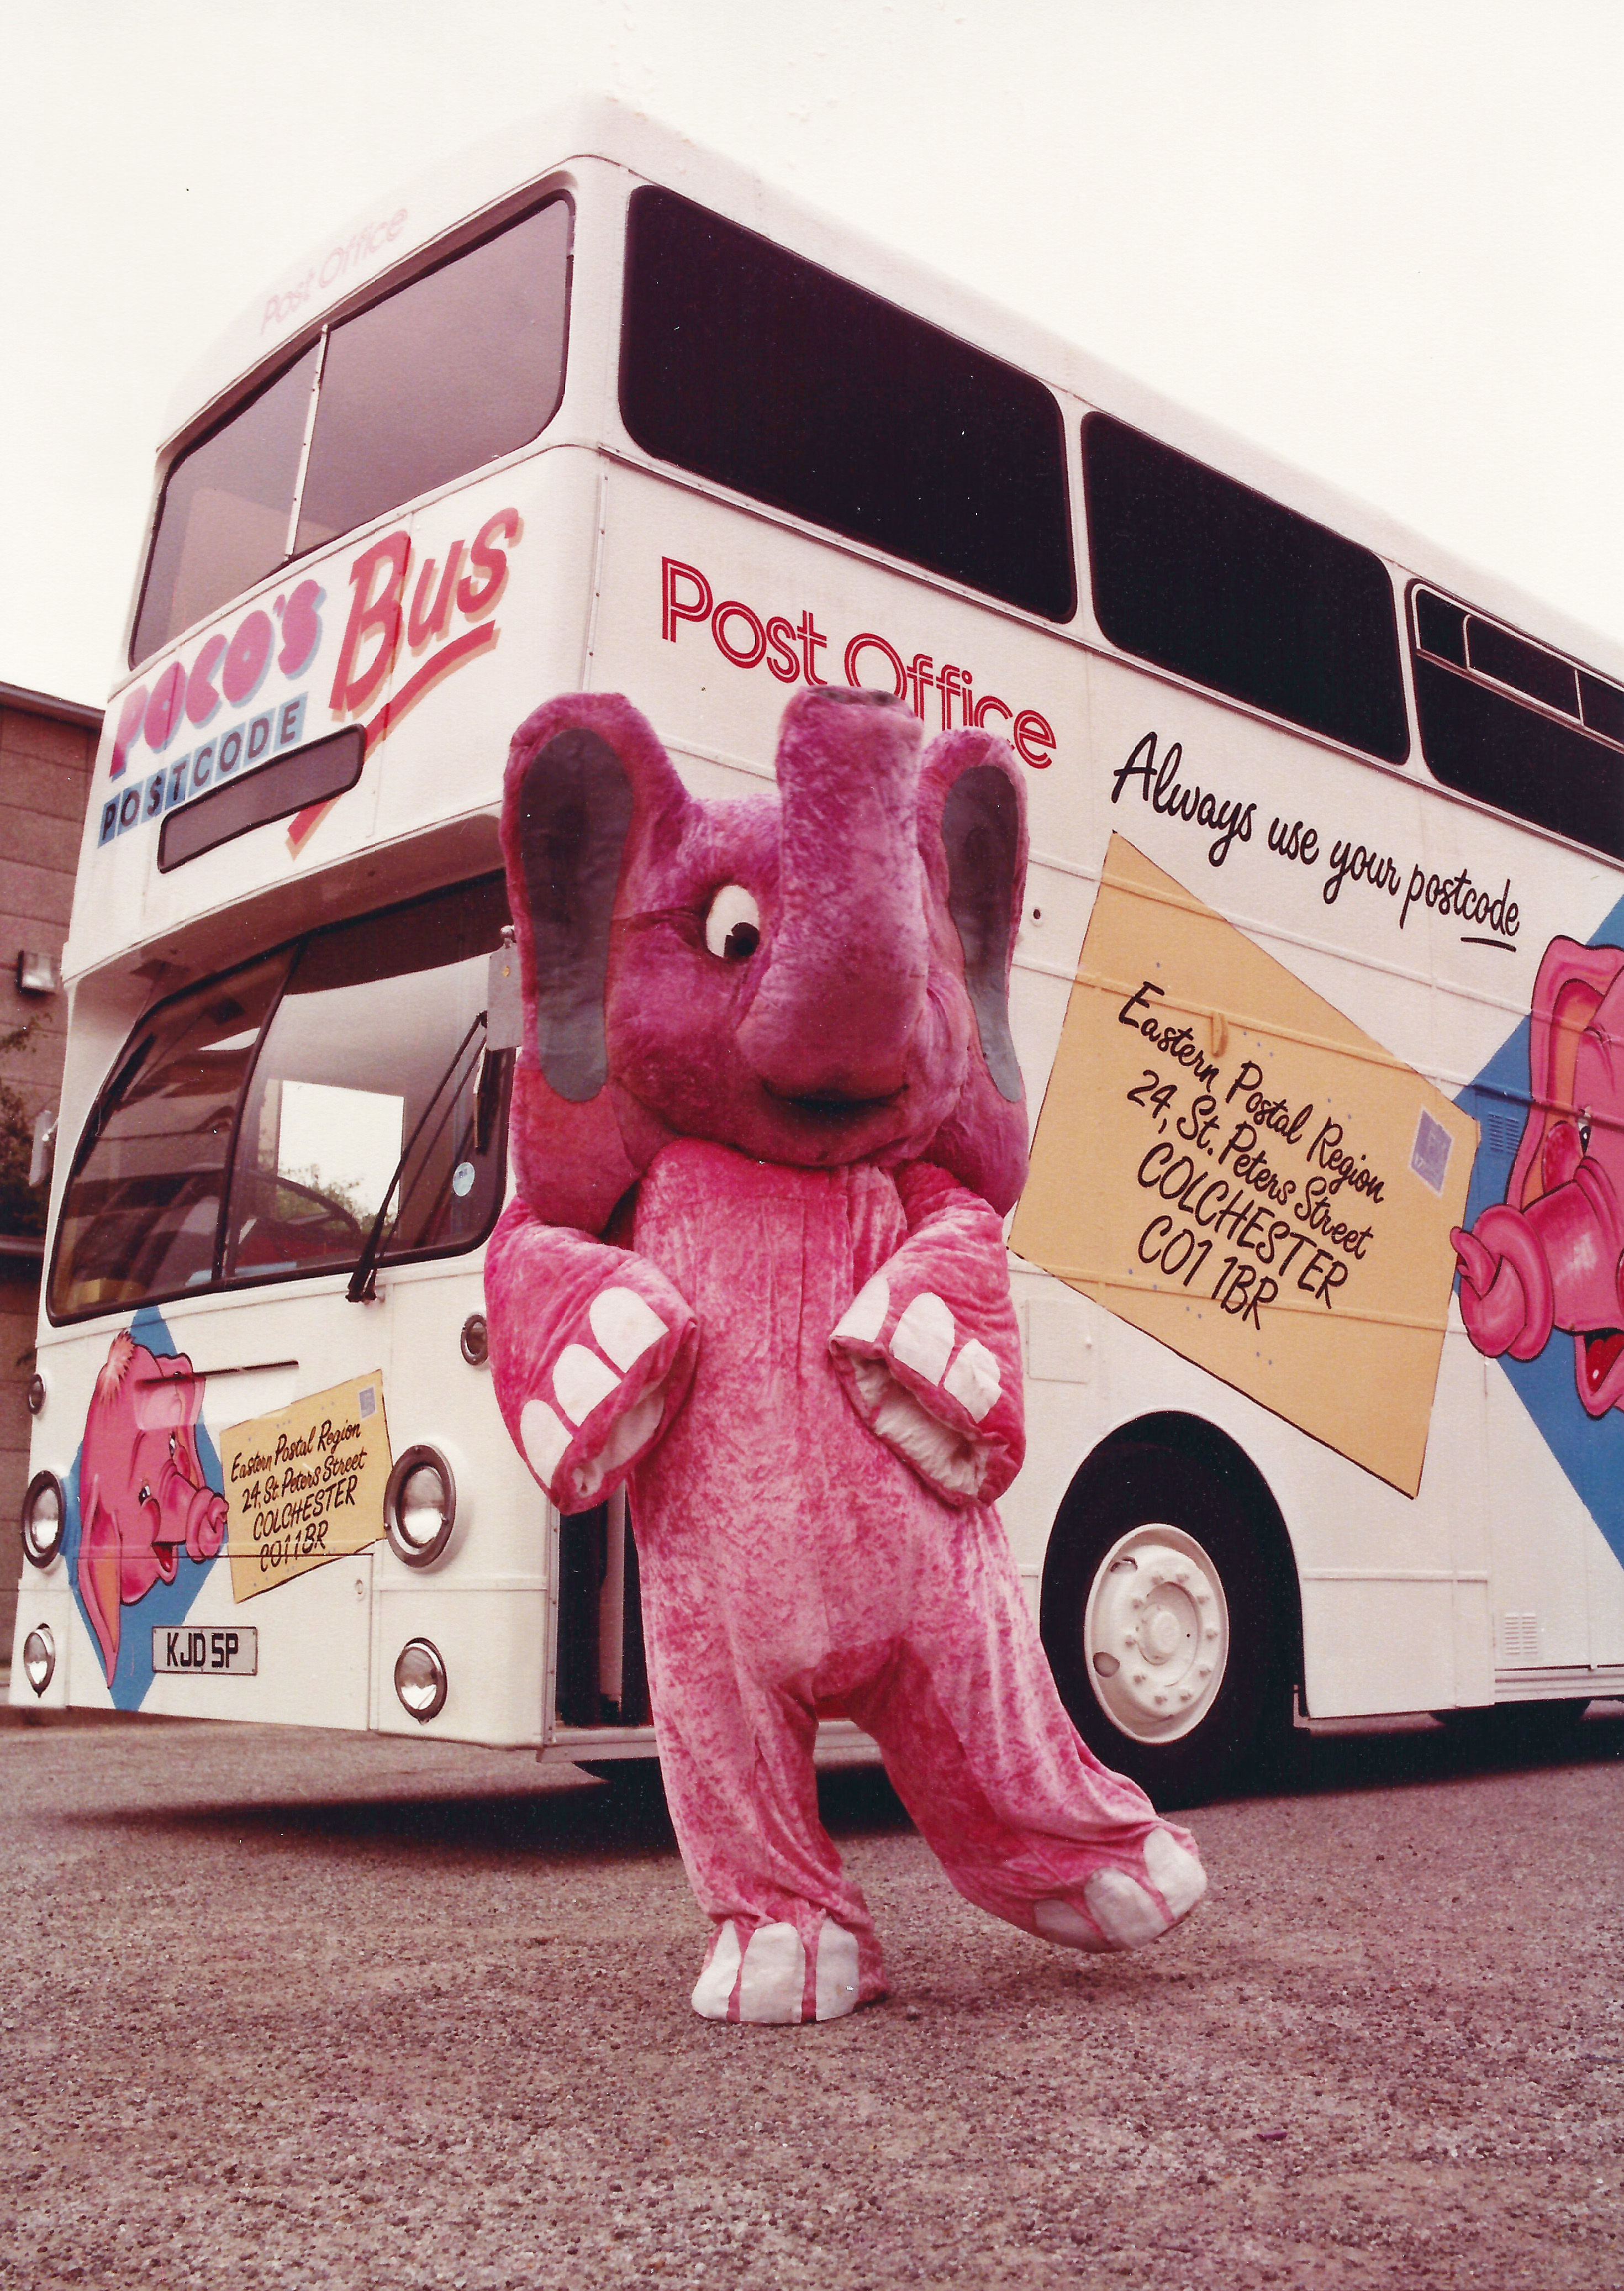 Costumed character with Poco's Postcode Bus, 1984